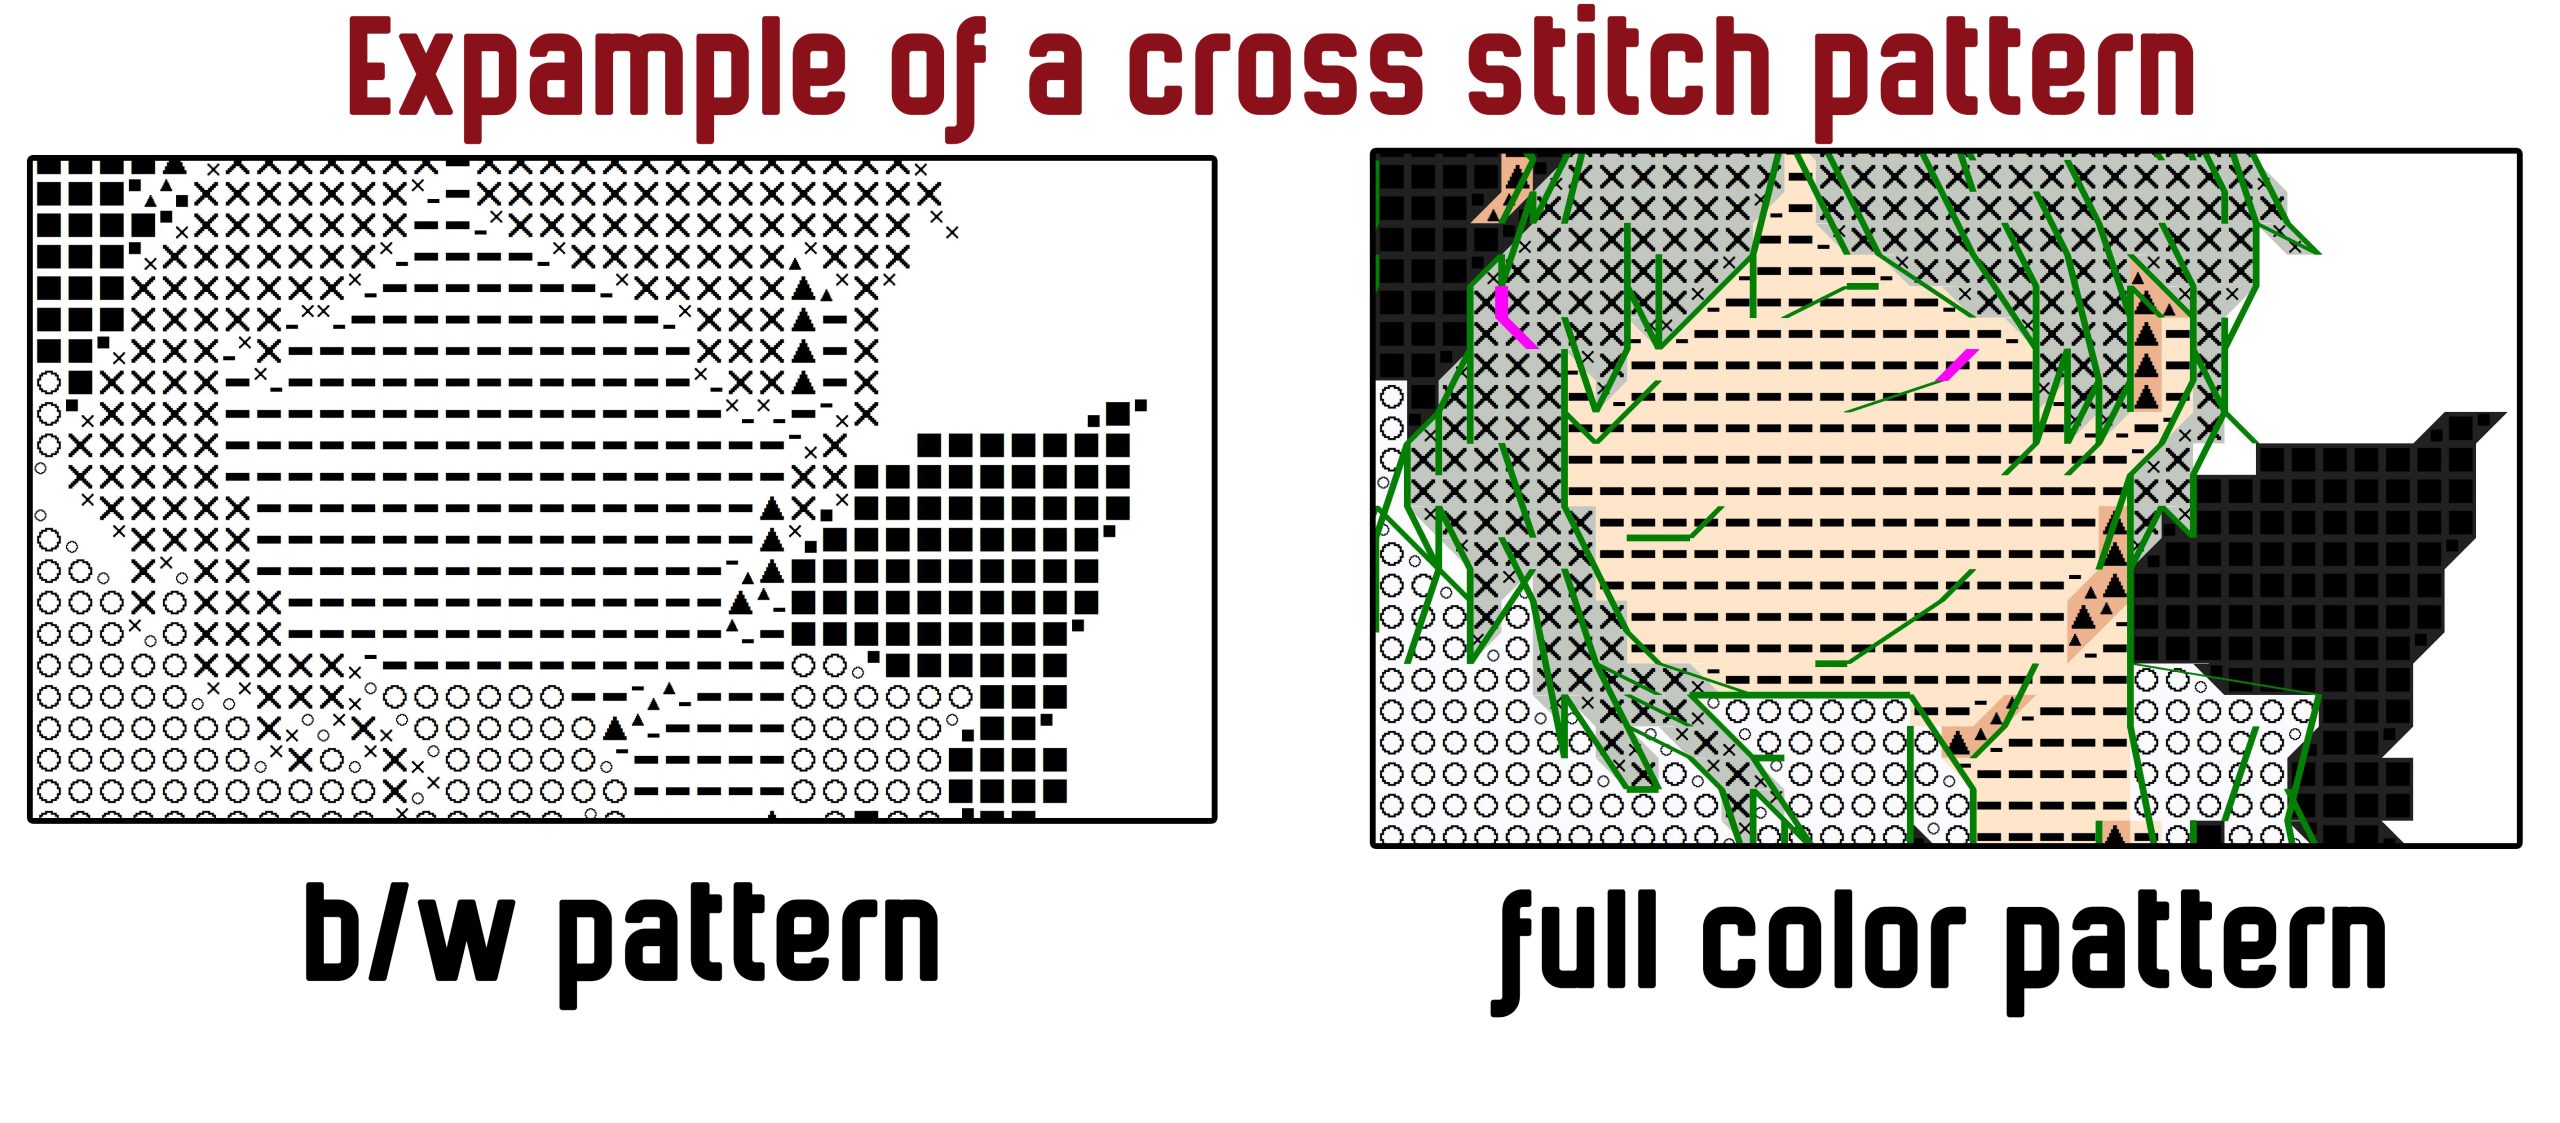 9000 Stitches [Video Game & Anime Cross-stitches] on X: 